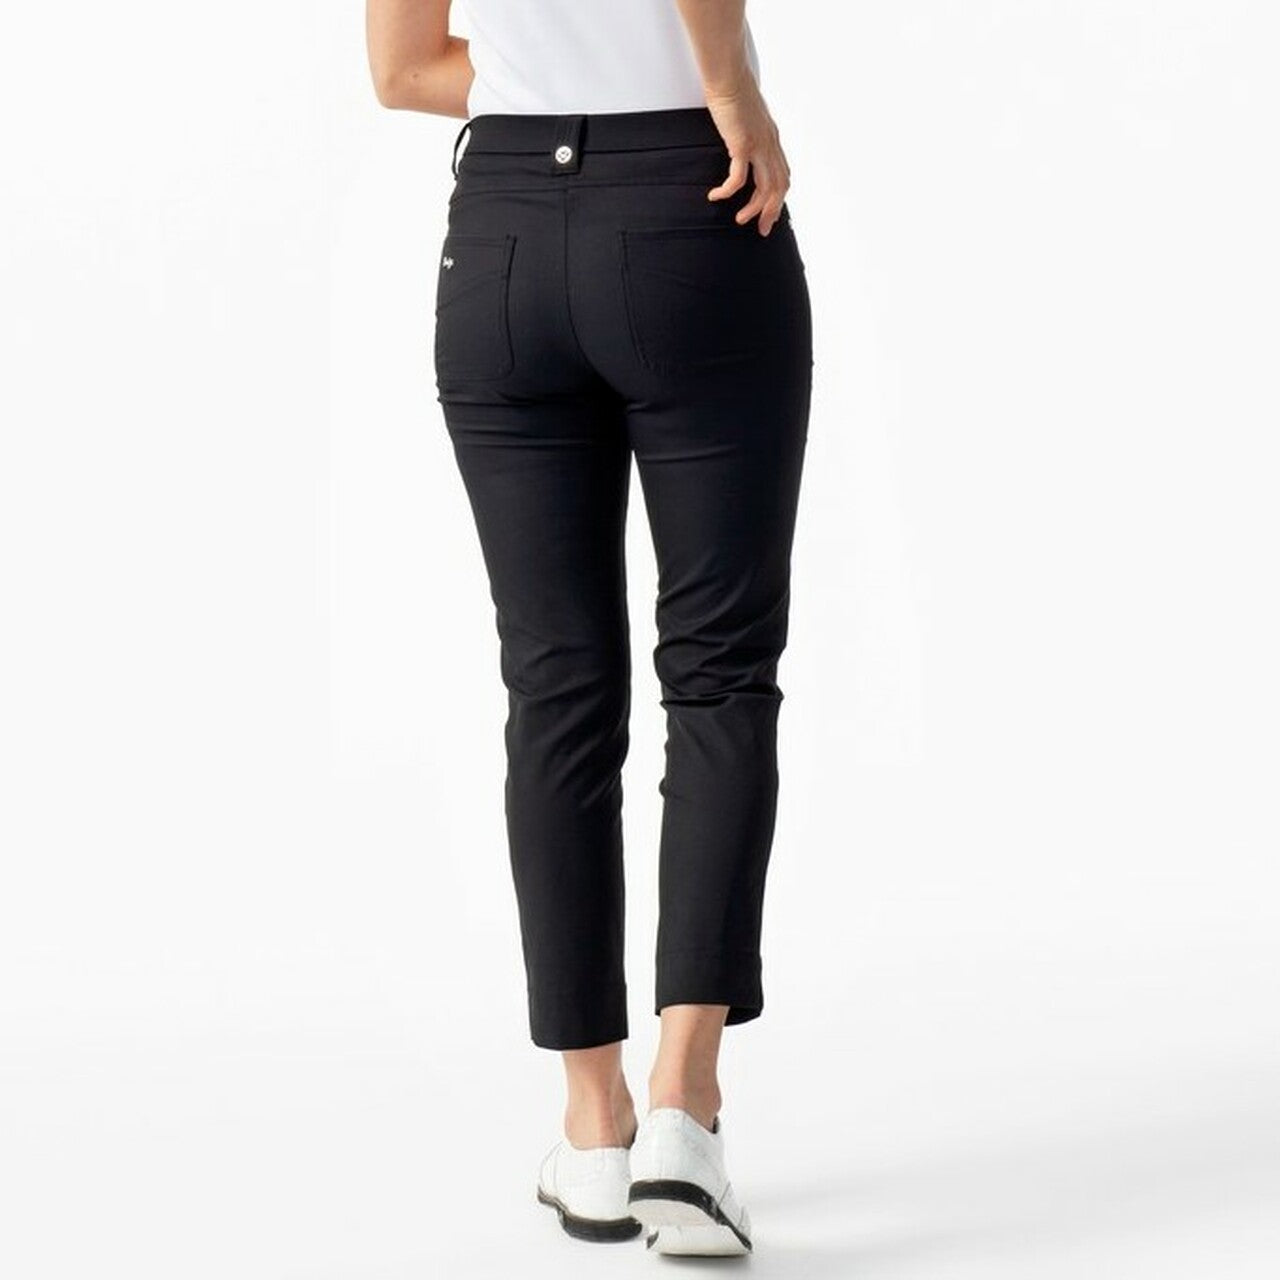 Daily Sports- Lyric Highwater Ankle Pants Black (Style#: 001/263/999)